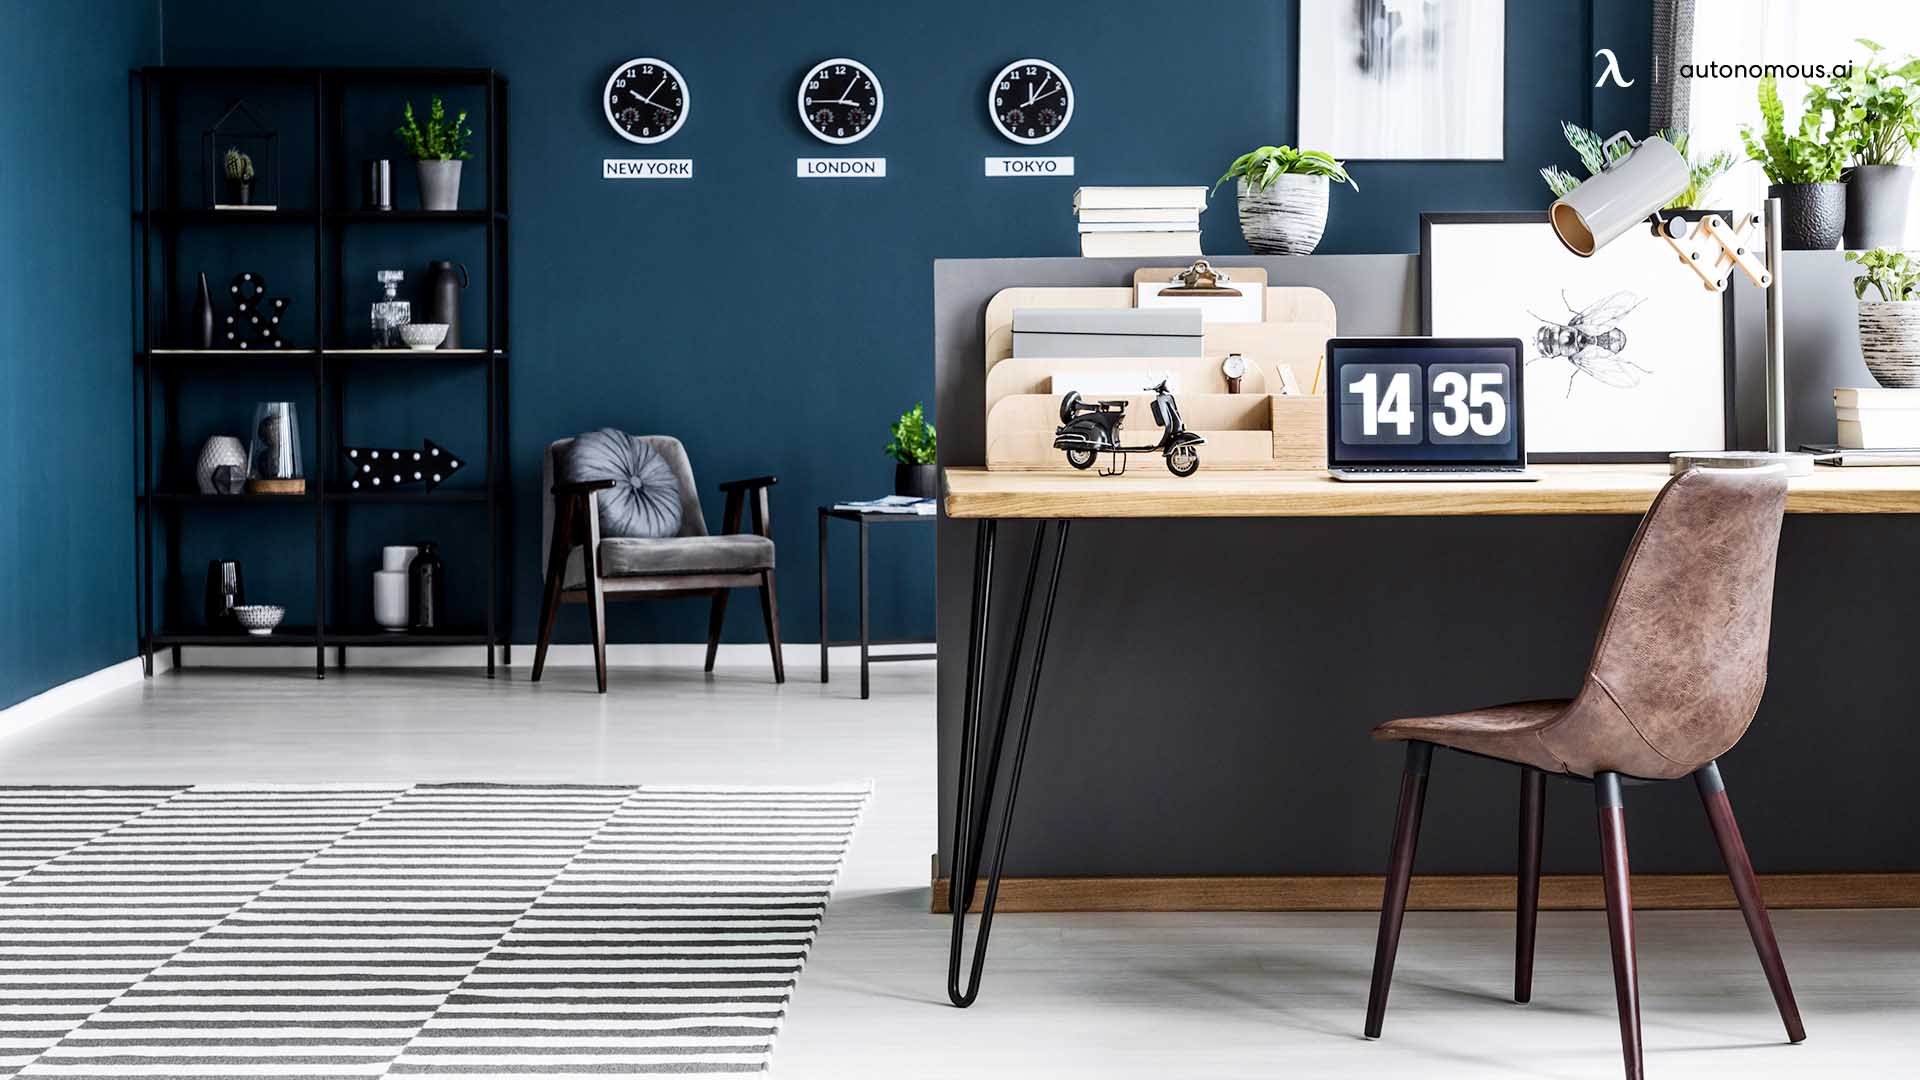  10 Office Decoration Options to Boost Productivity